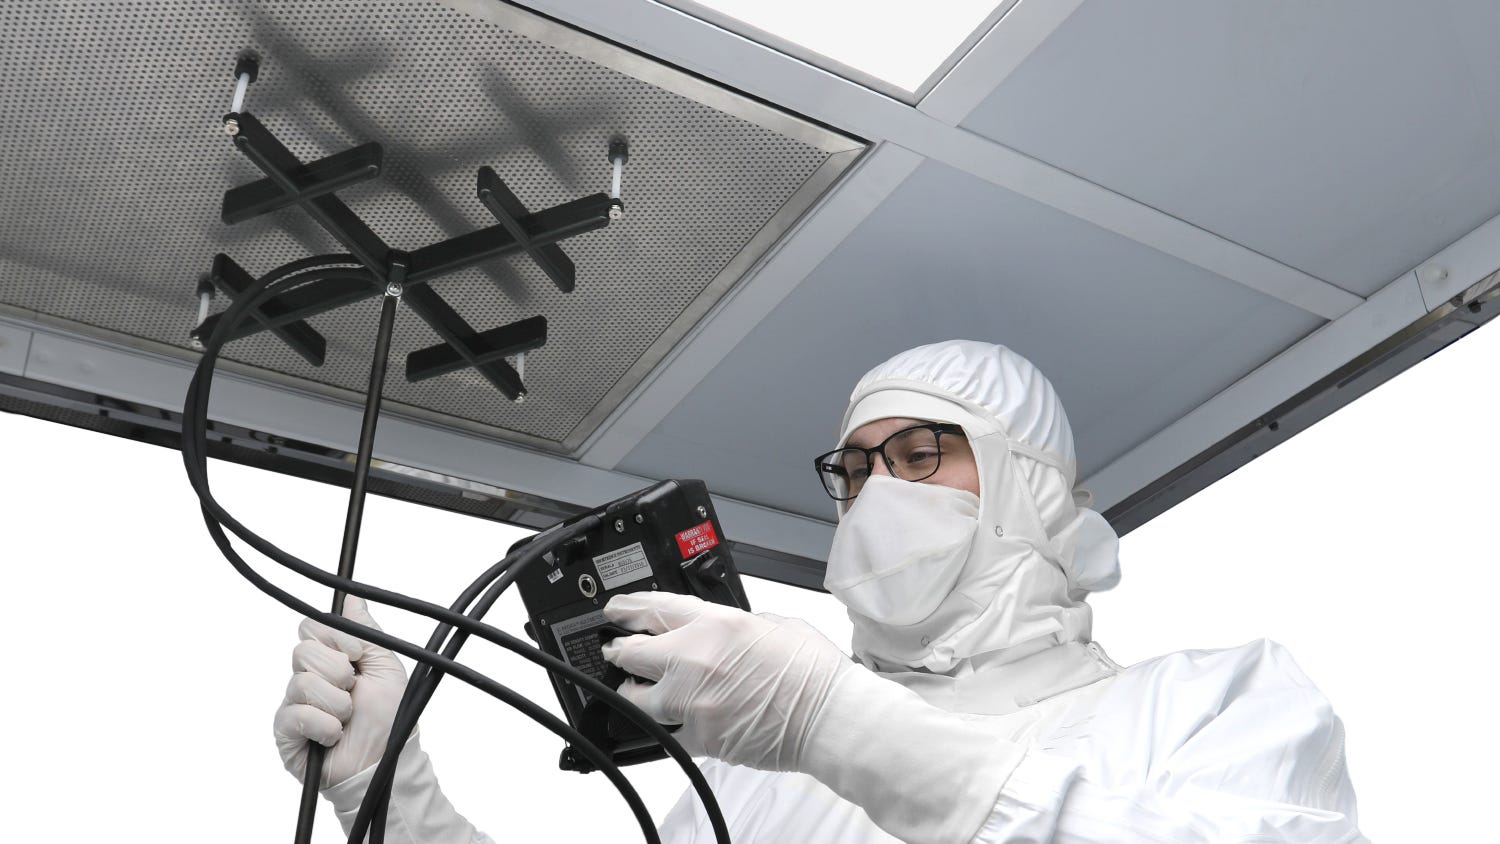 Methods of Cleanroom Air Flow Calibration - Tips for Balancing and Calibration